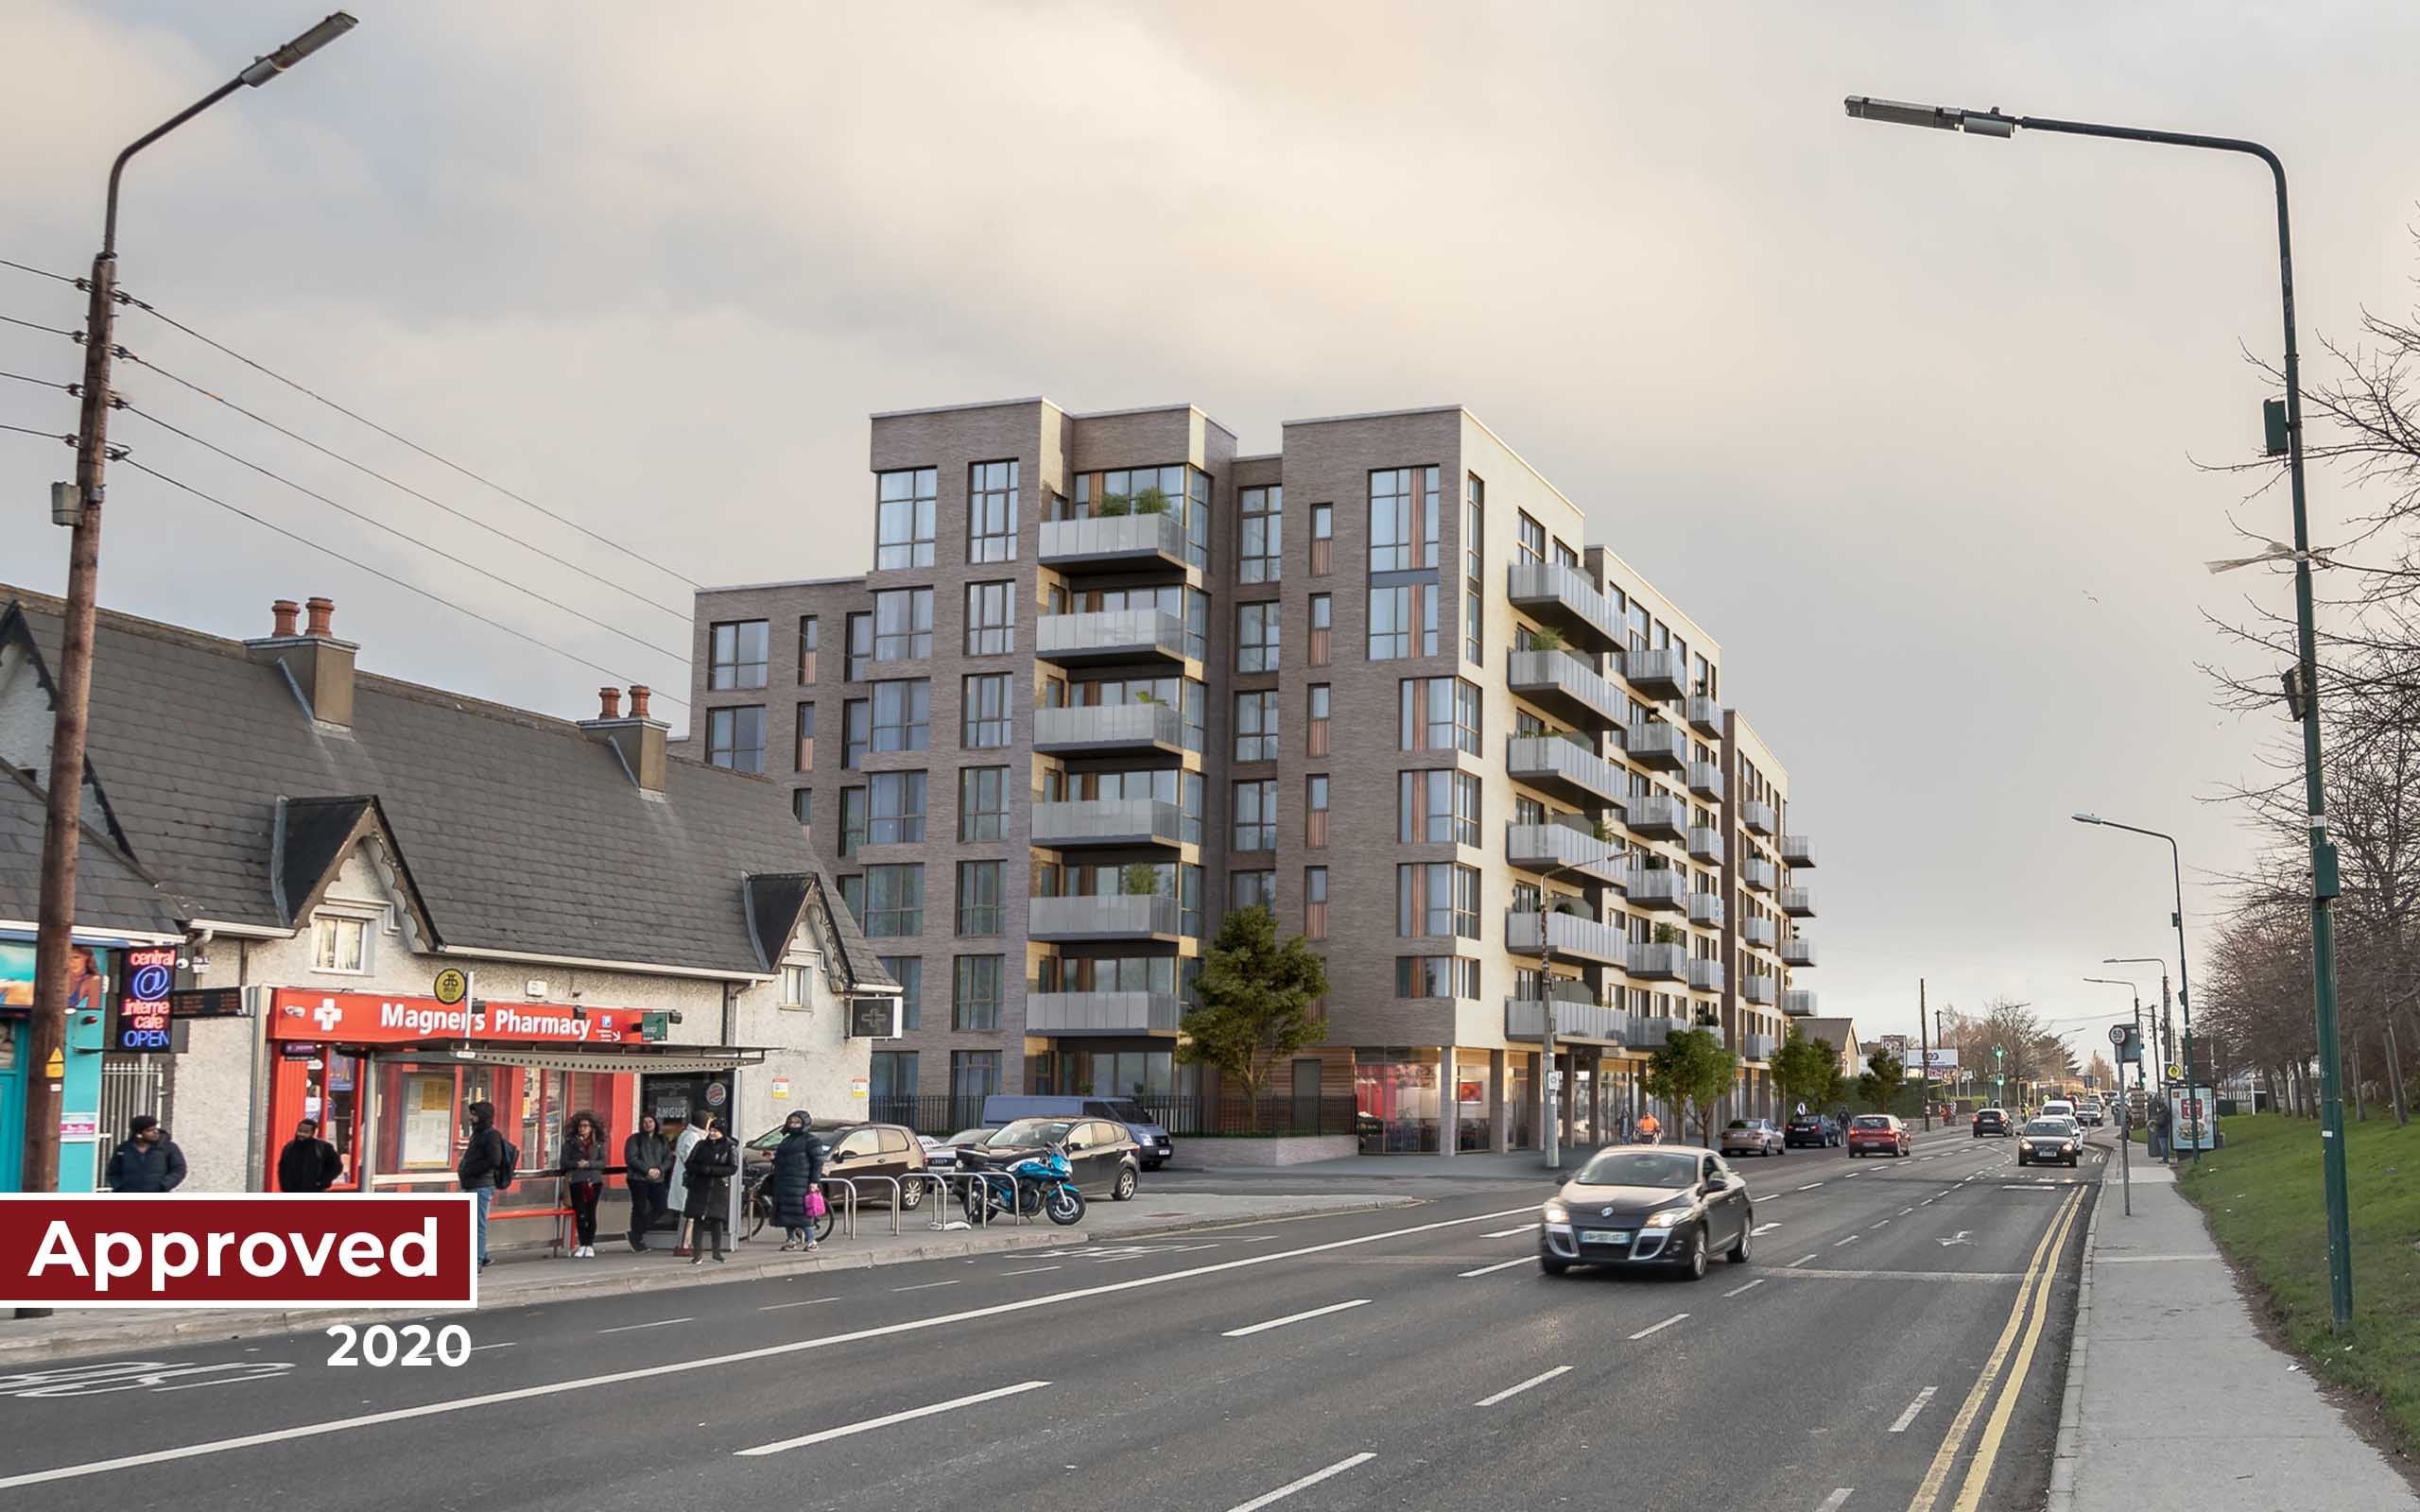 Verified view of 2020 approved mix-use development at Swiss Cottage Pub, Santry.